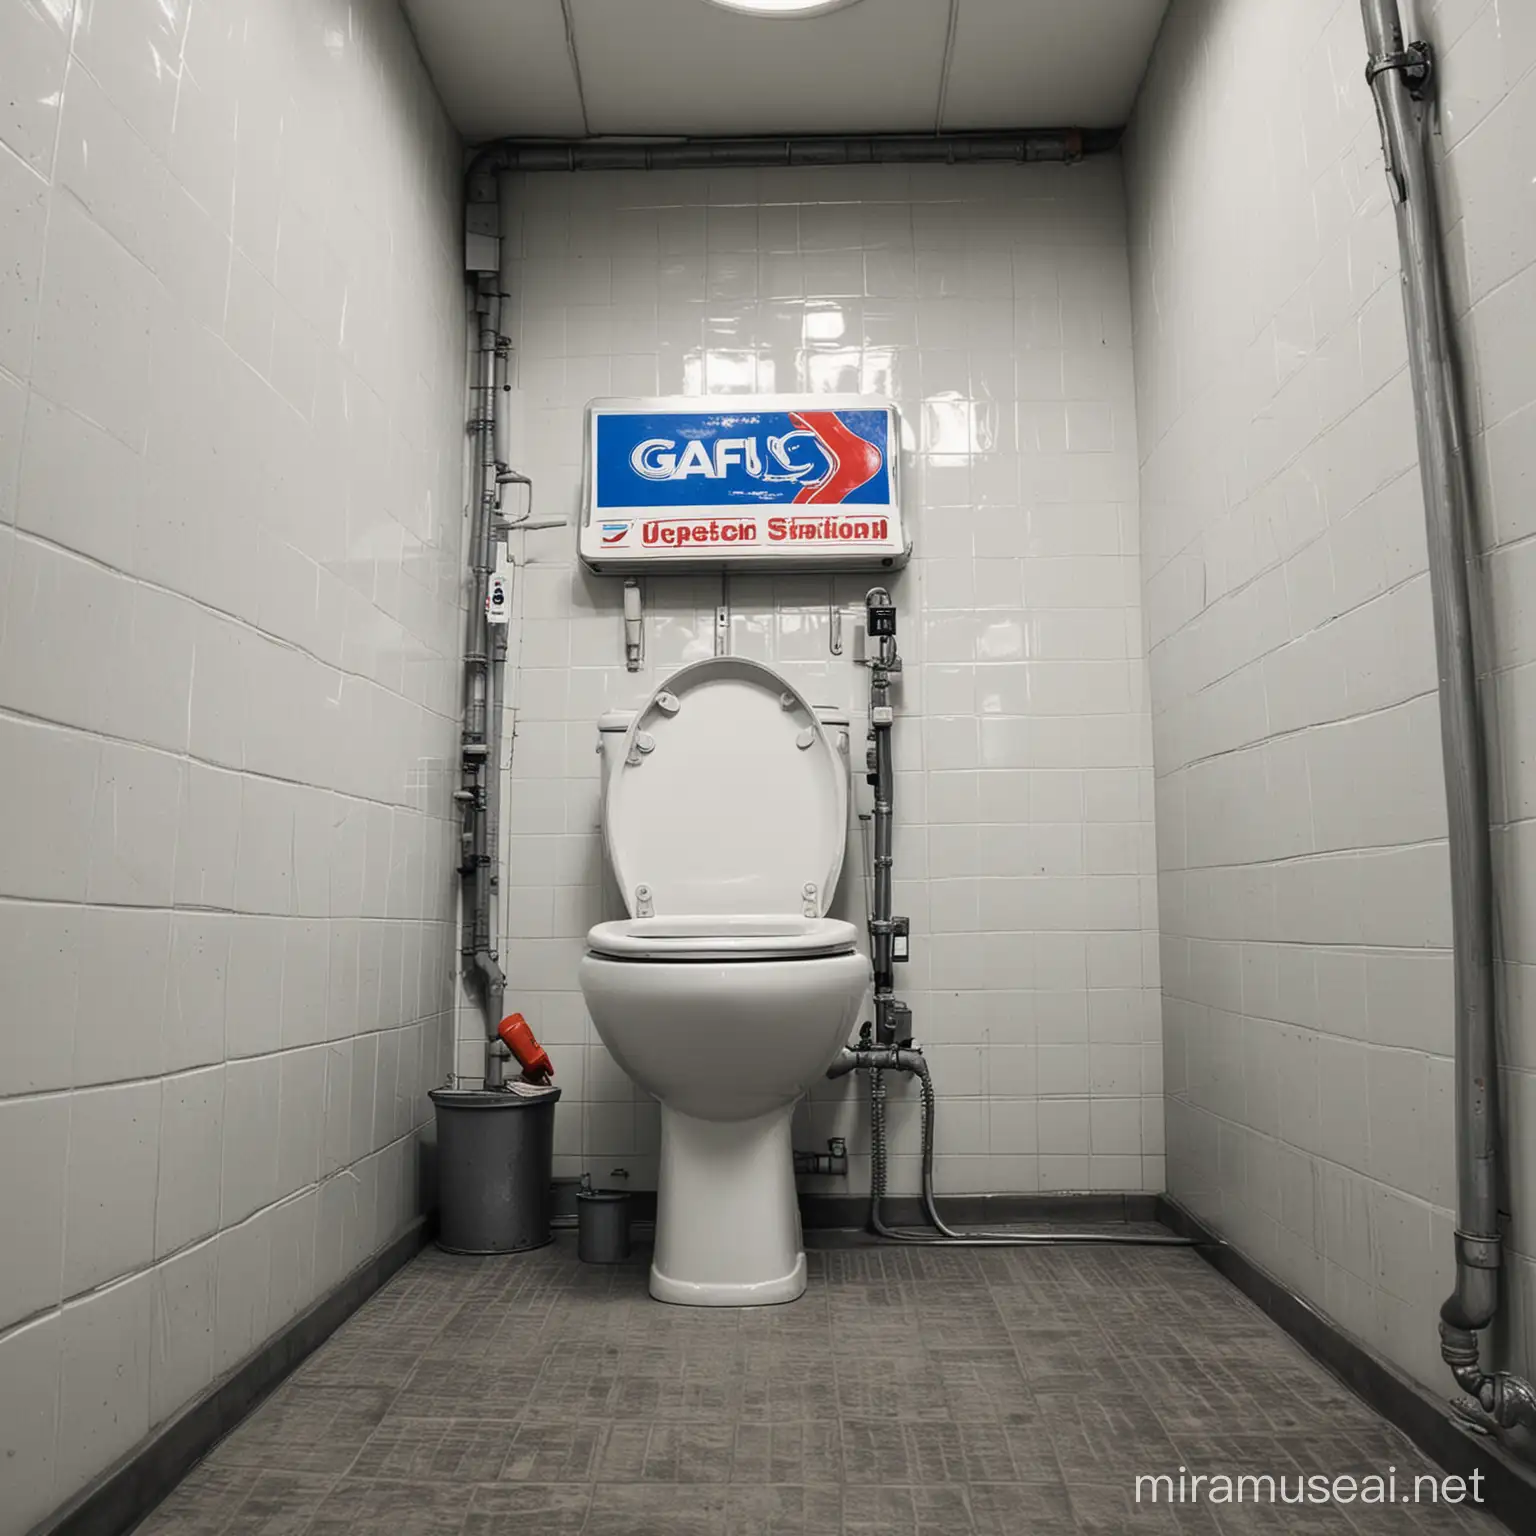  a low angle view camera of a realistic gas station toilet close up
